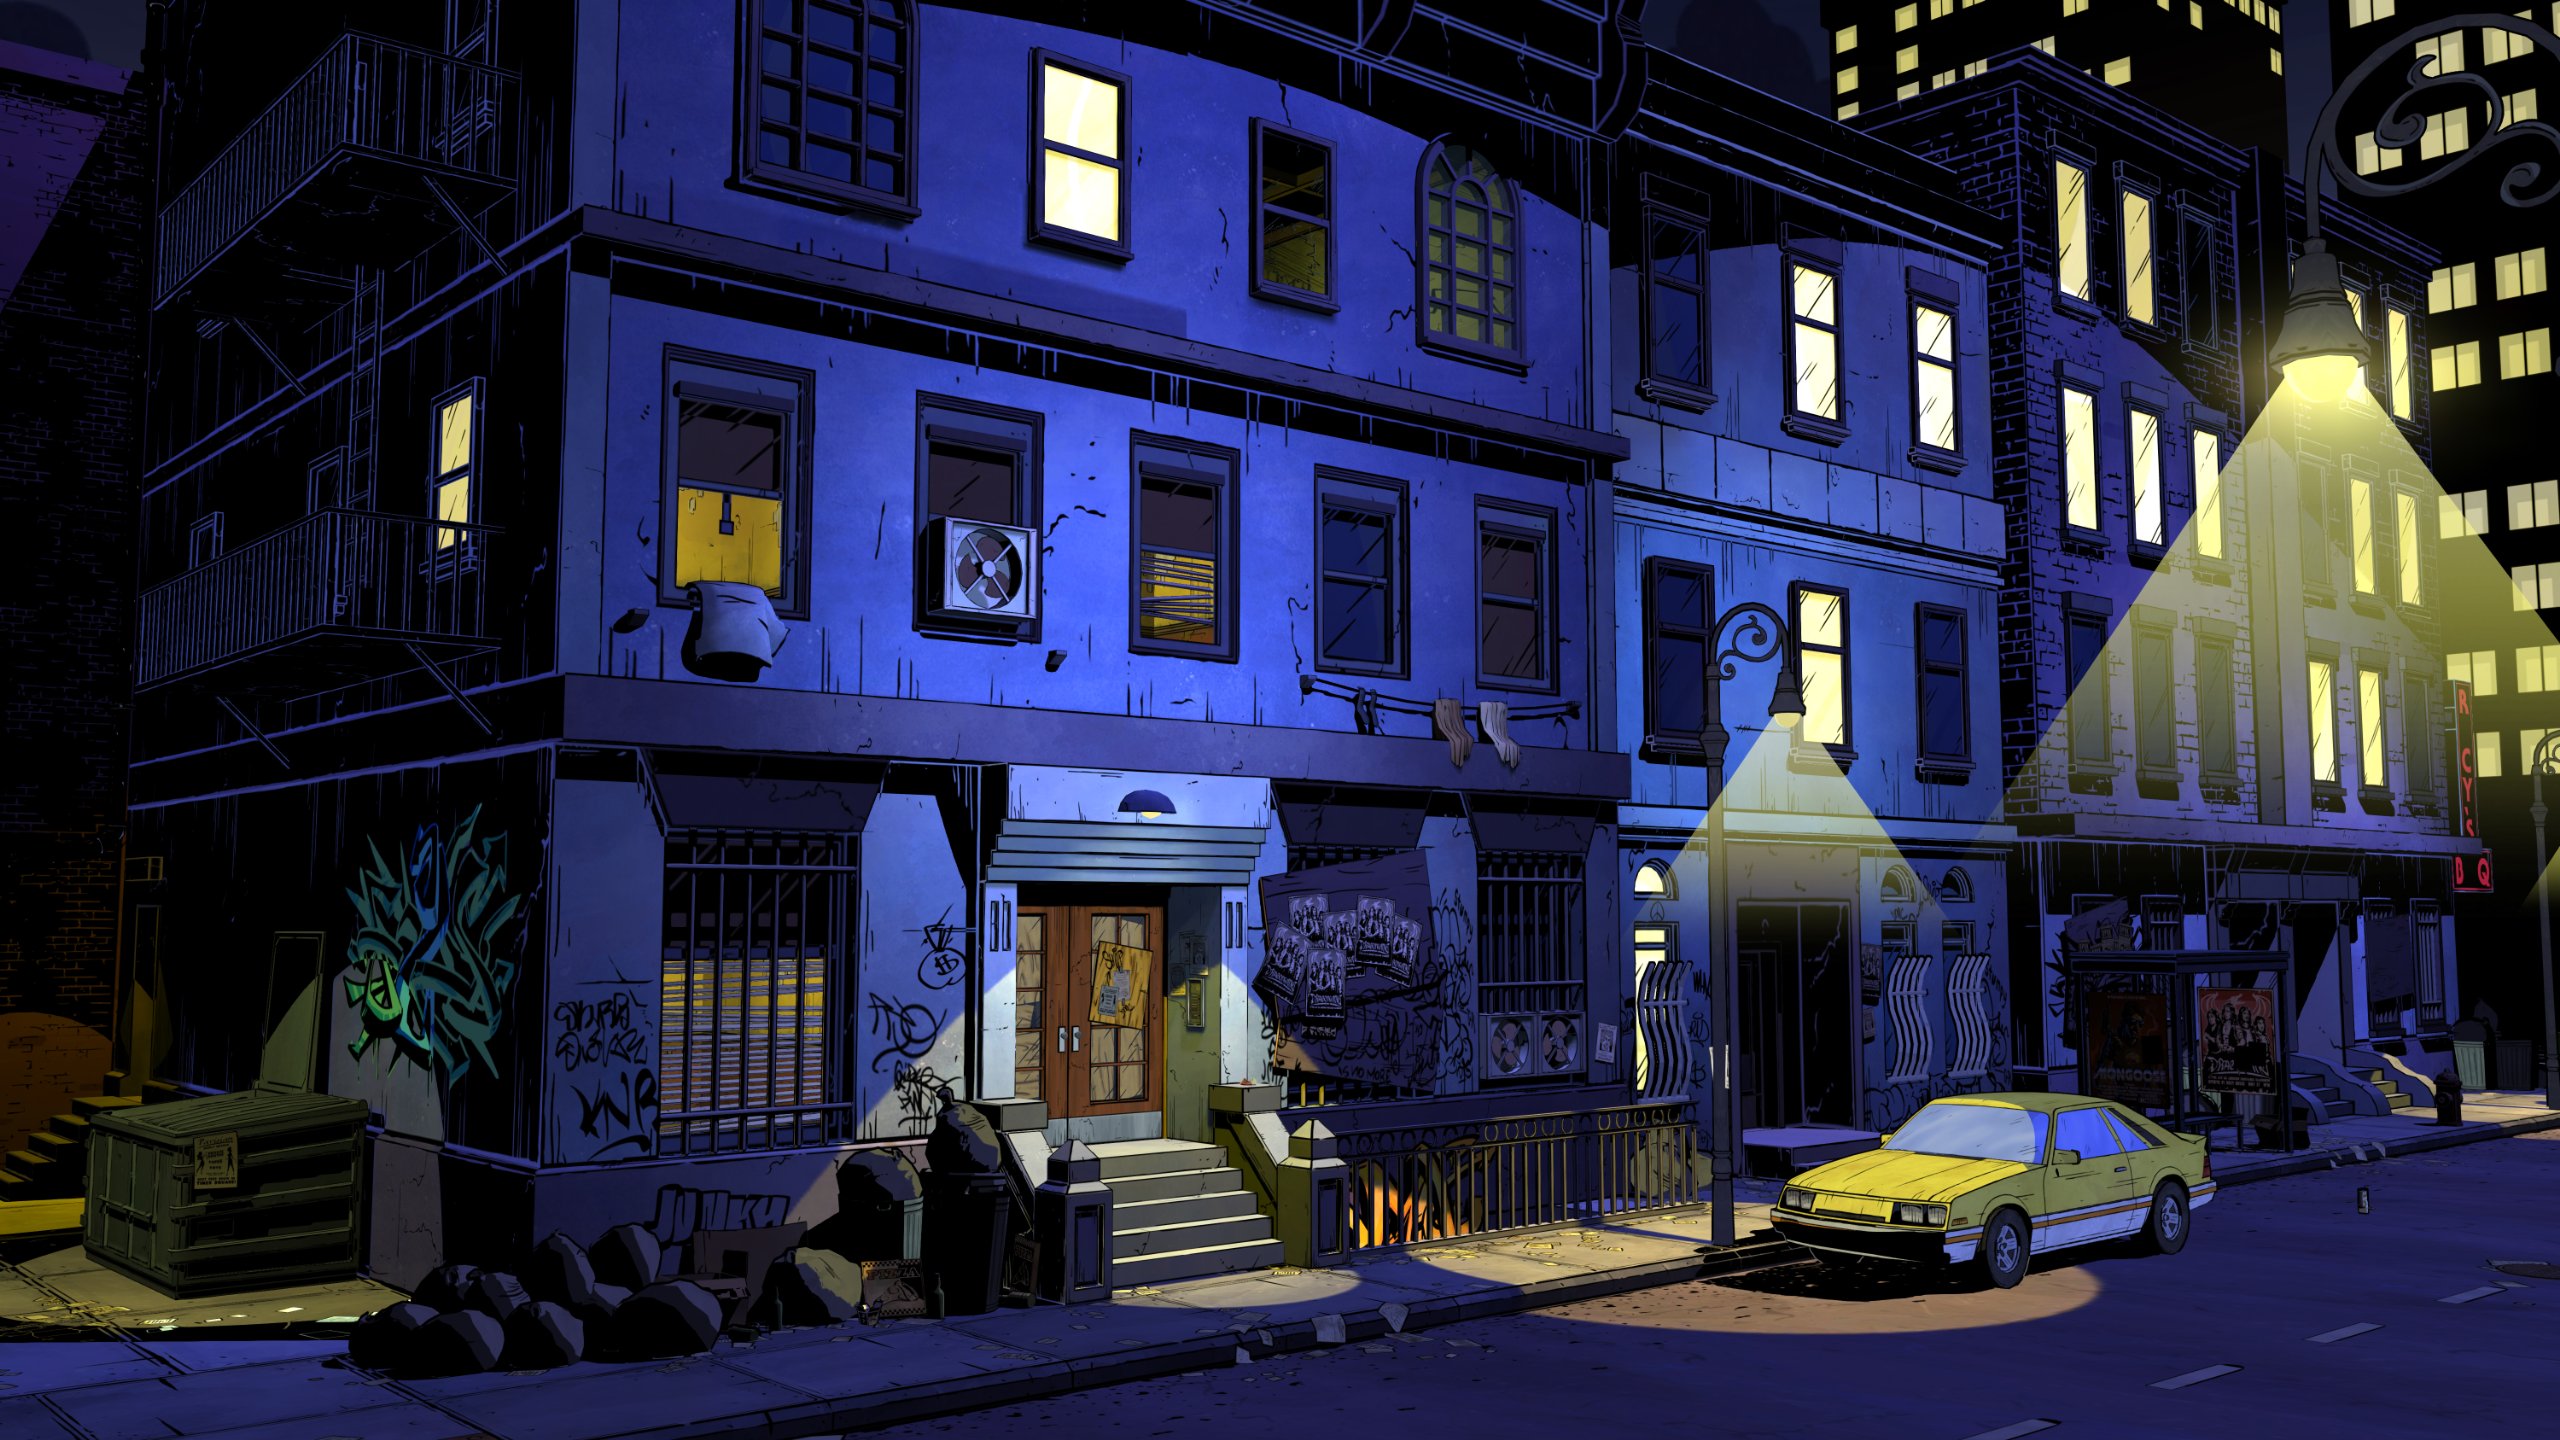 The Wolf Among Us for Mac [Download]